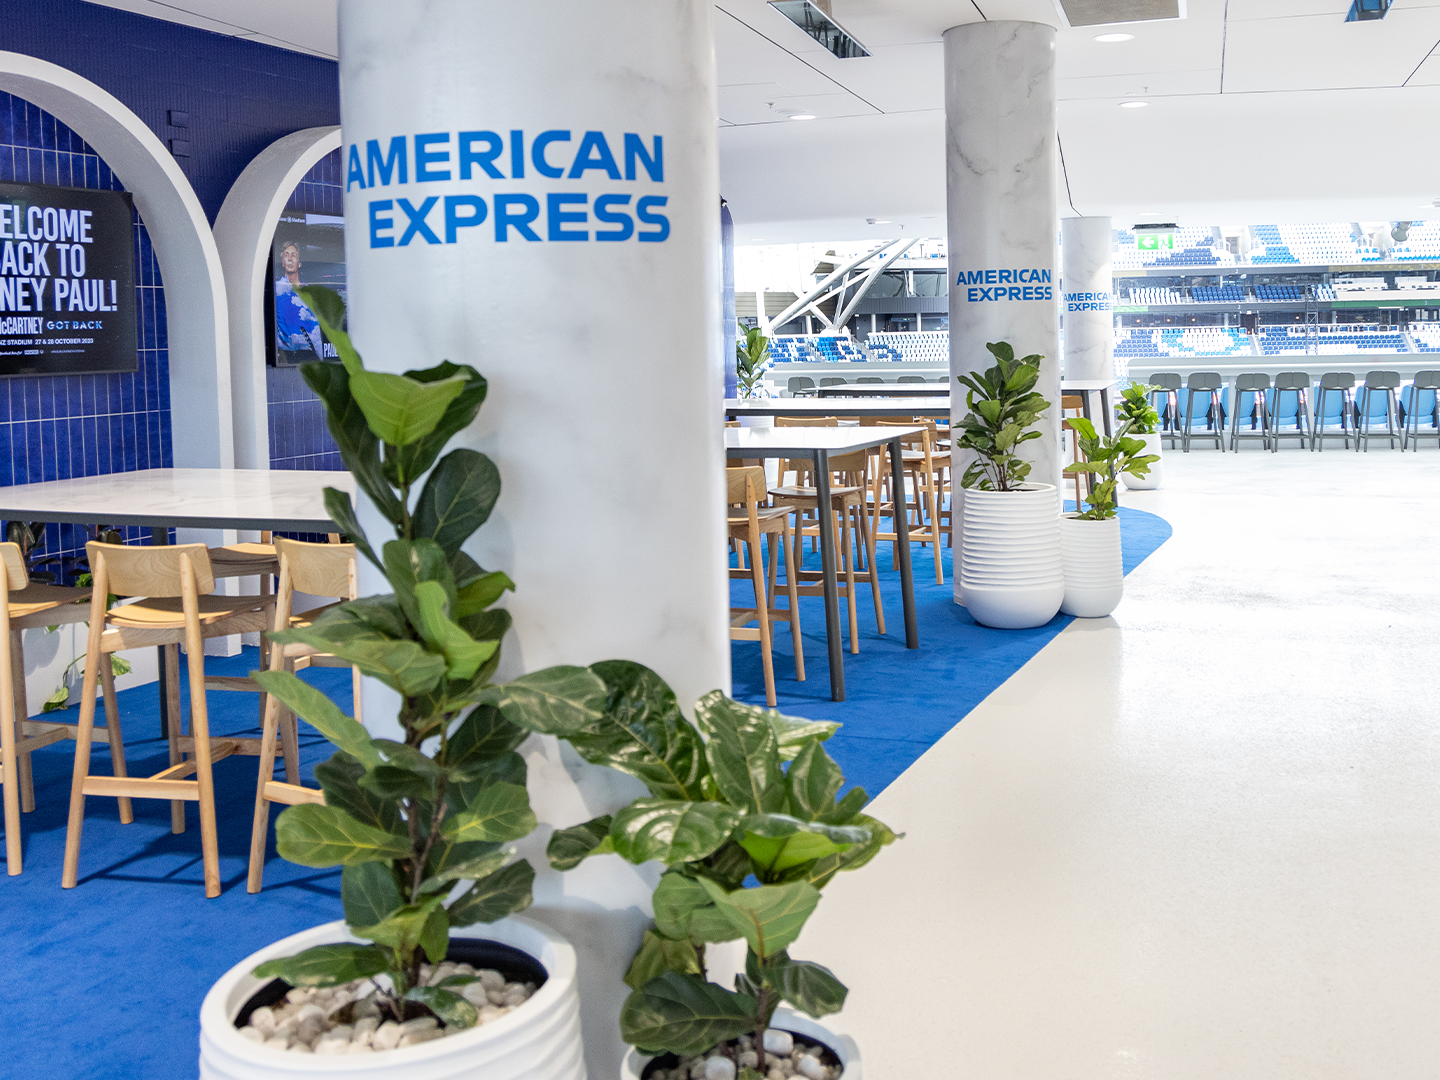 American Express and Venues NSW Announce New Partnership